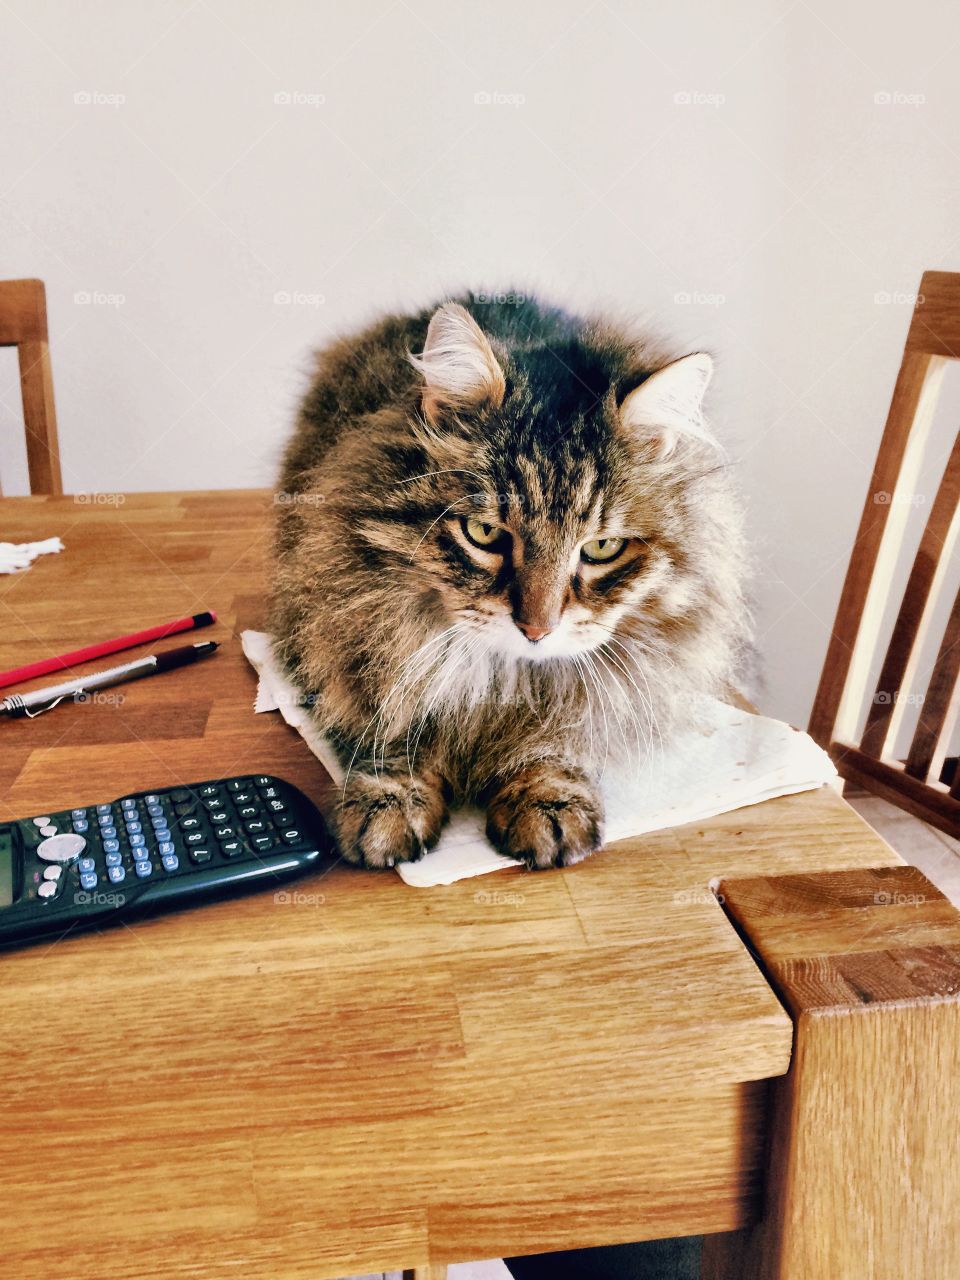 Tabby cat on wooden table